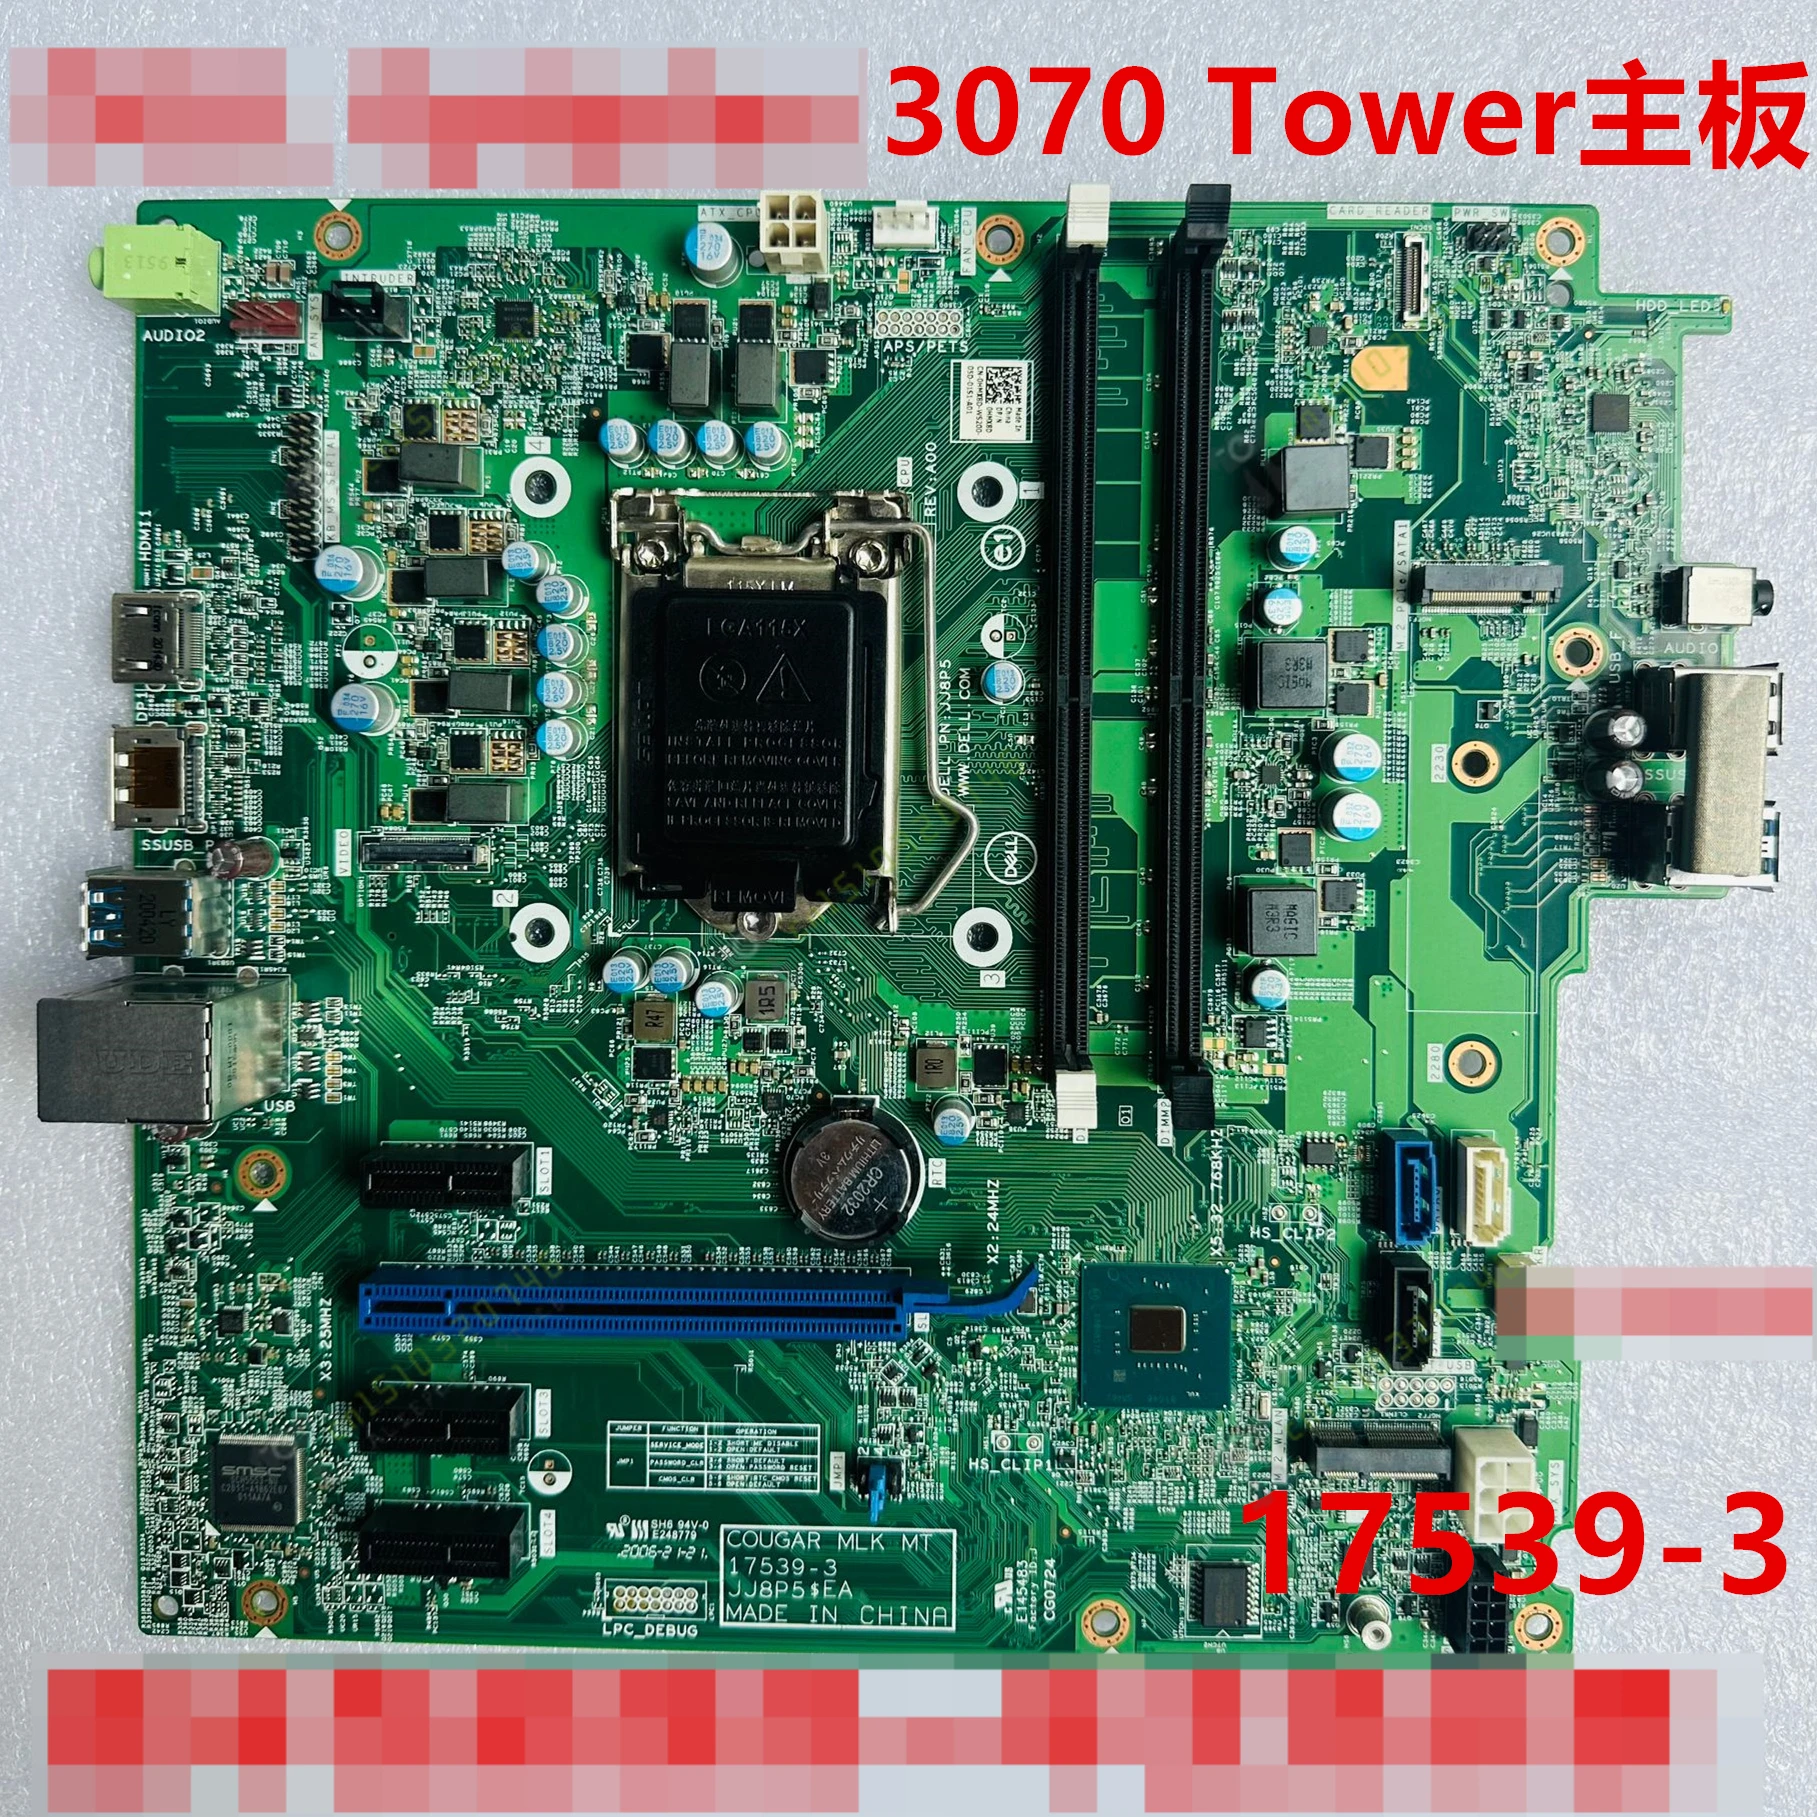 

3070 Tower Motherboard 17539-3